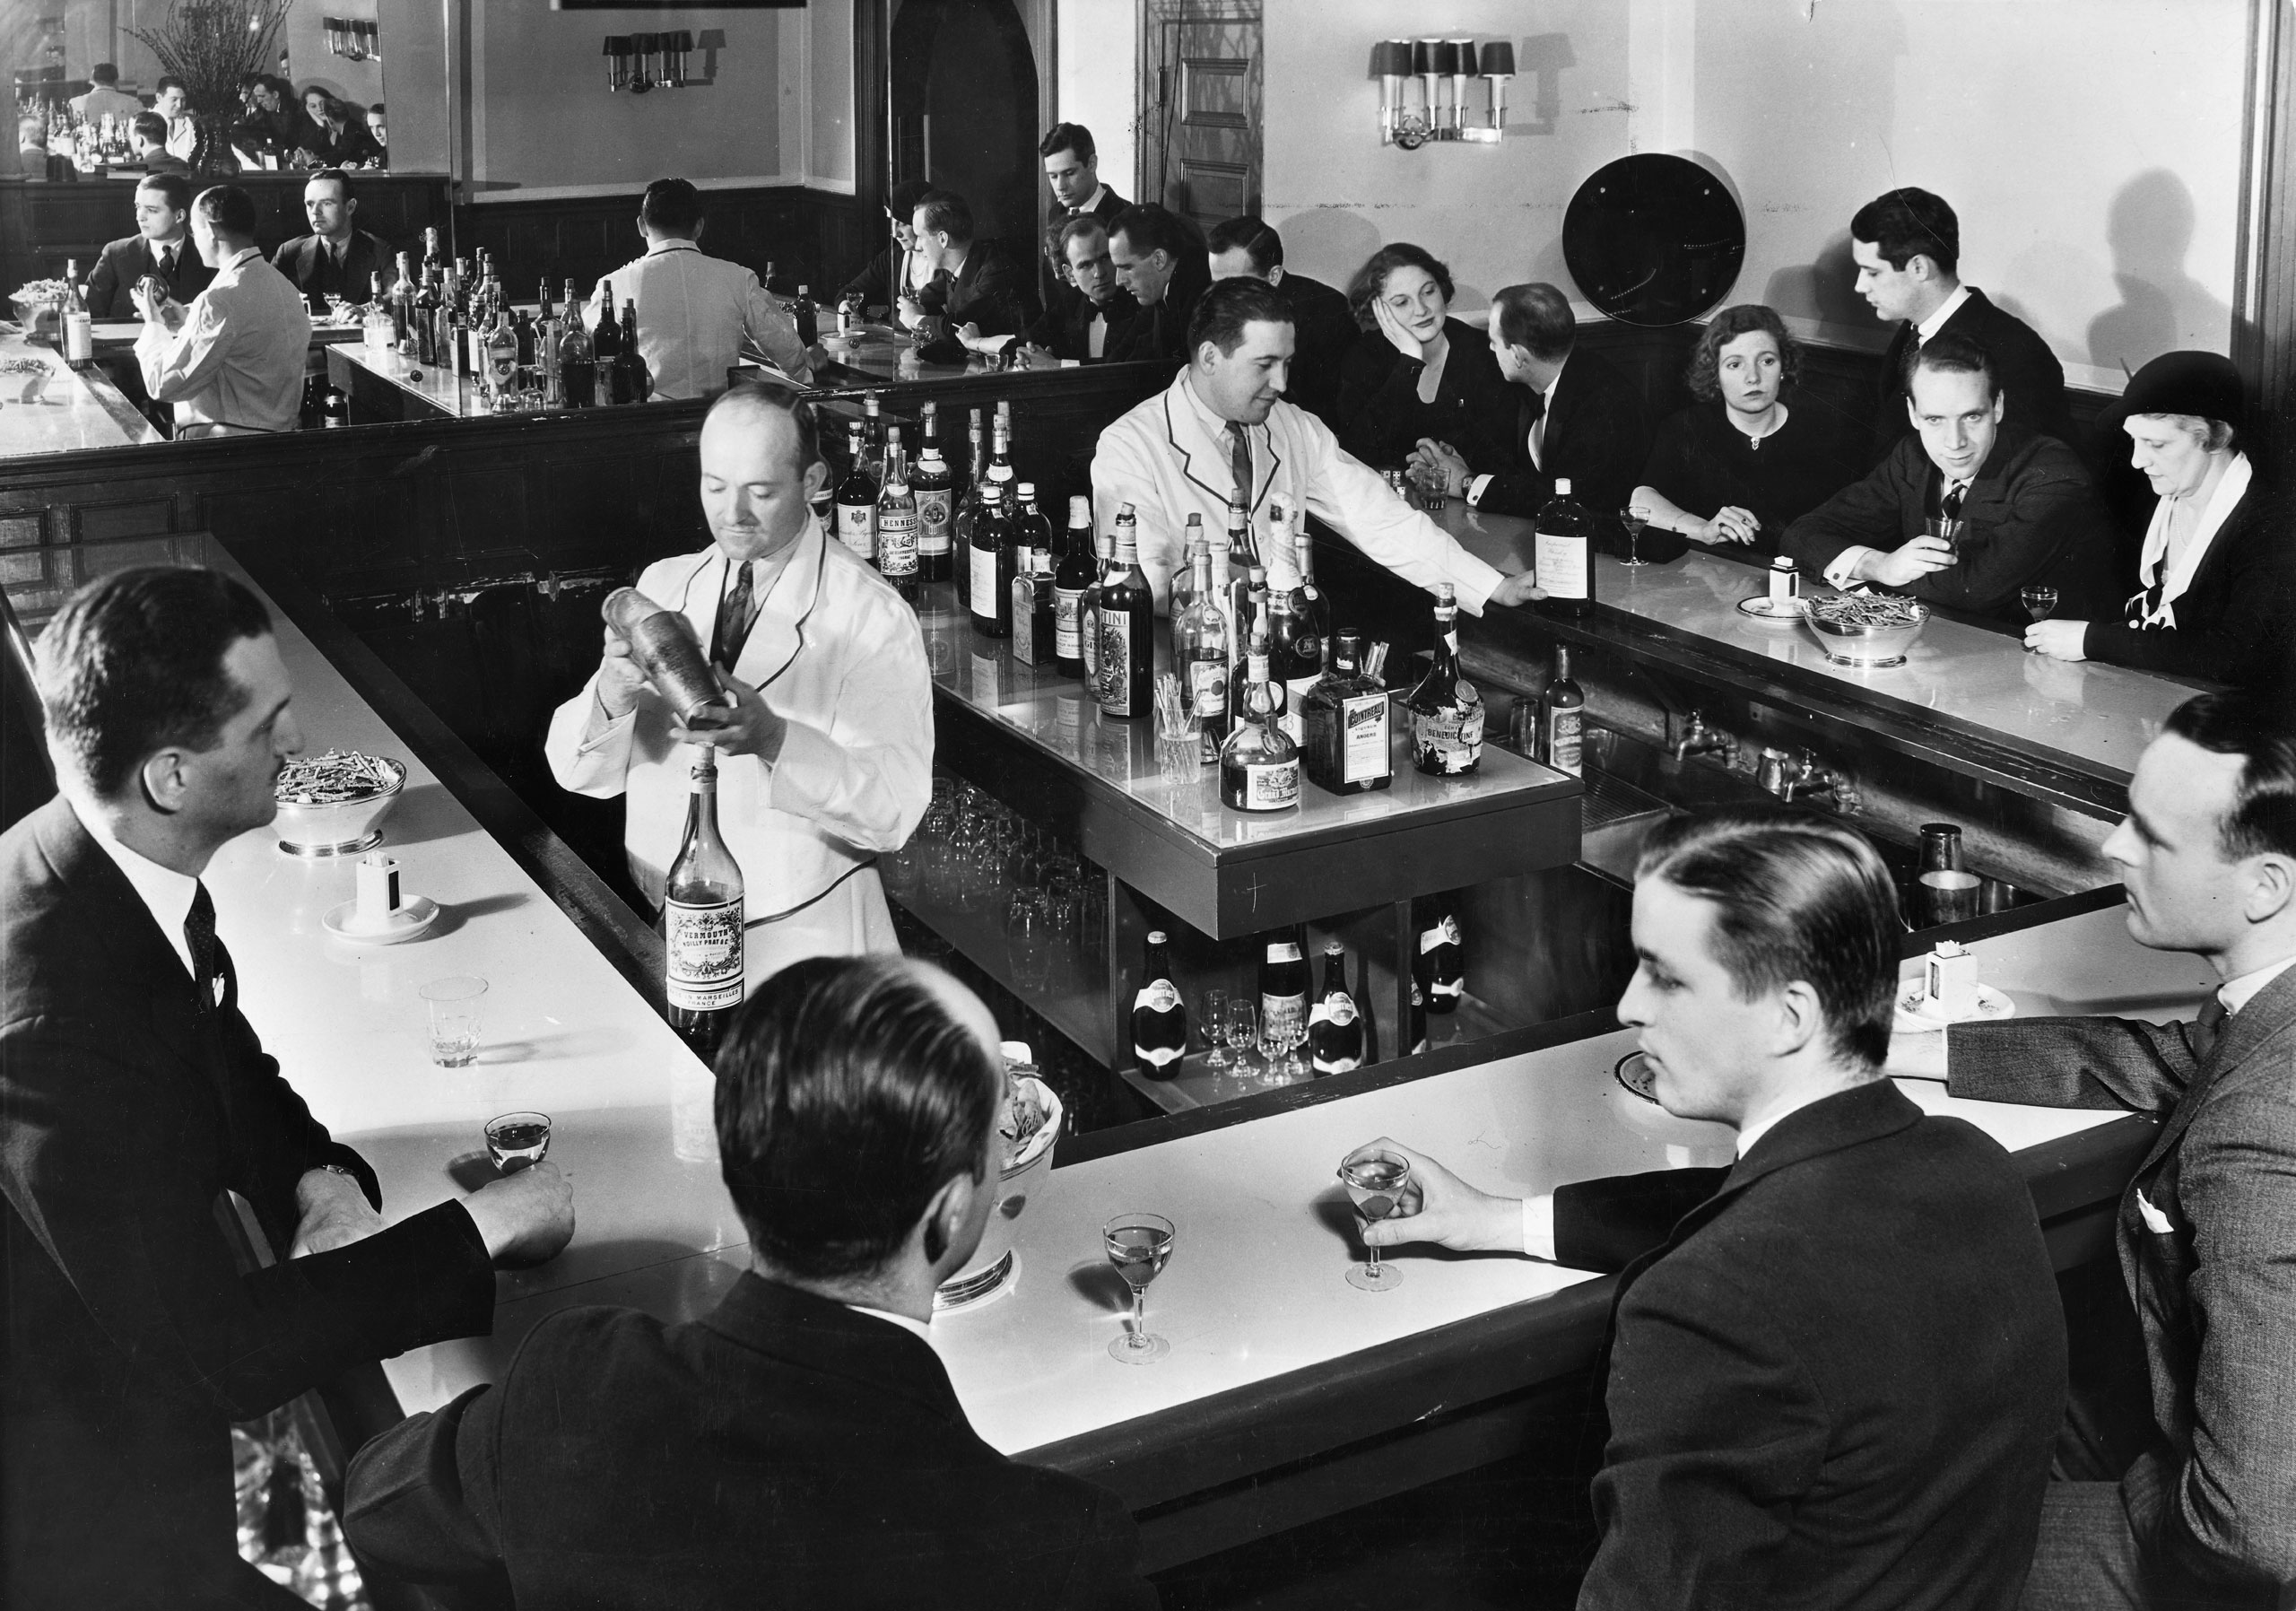 Prohibition's Last Call: Inside the Speakeasies of New York in 1933